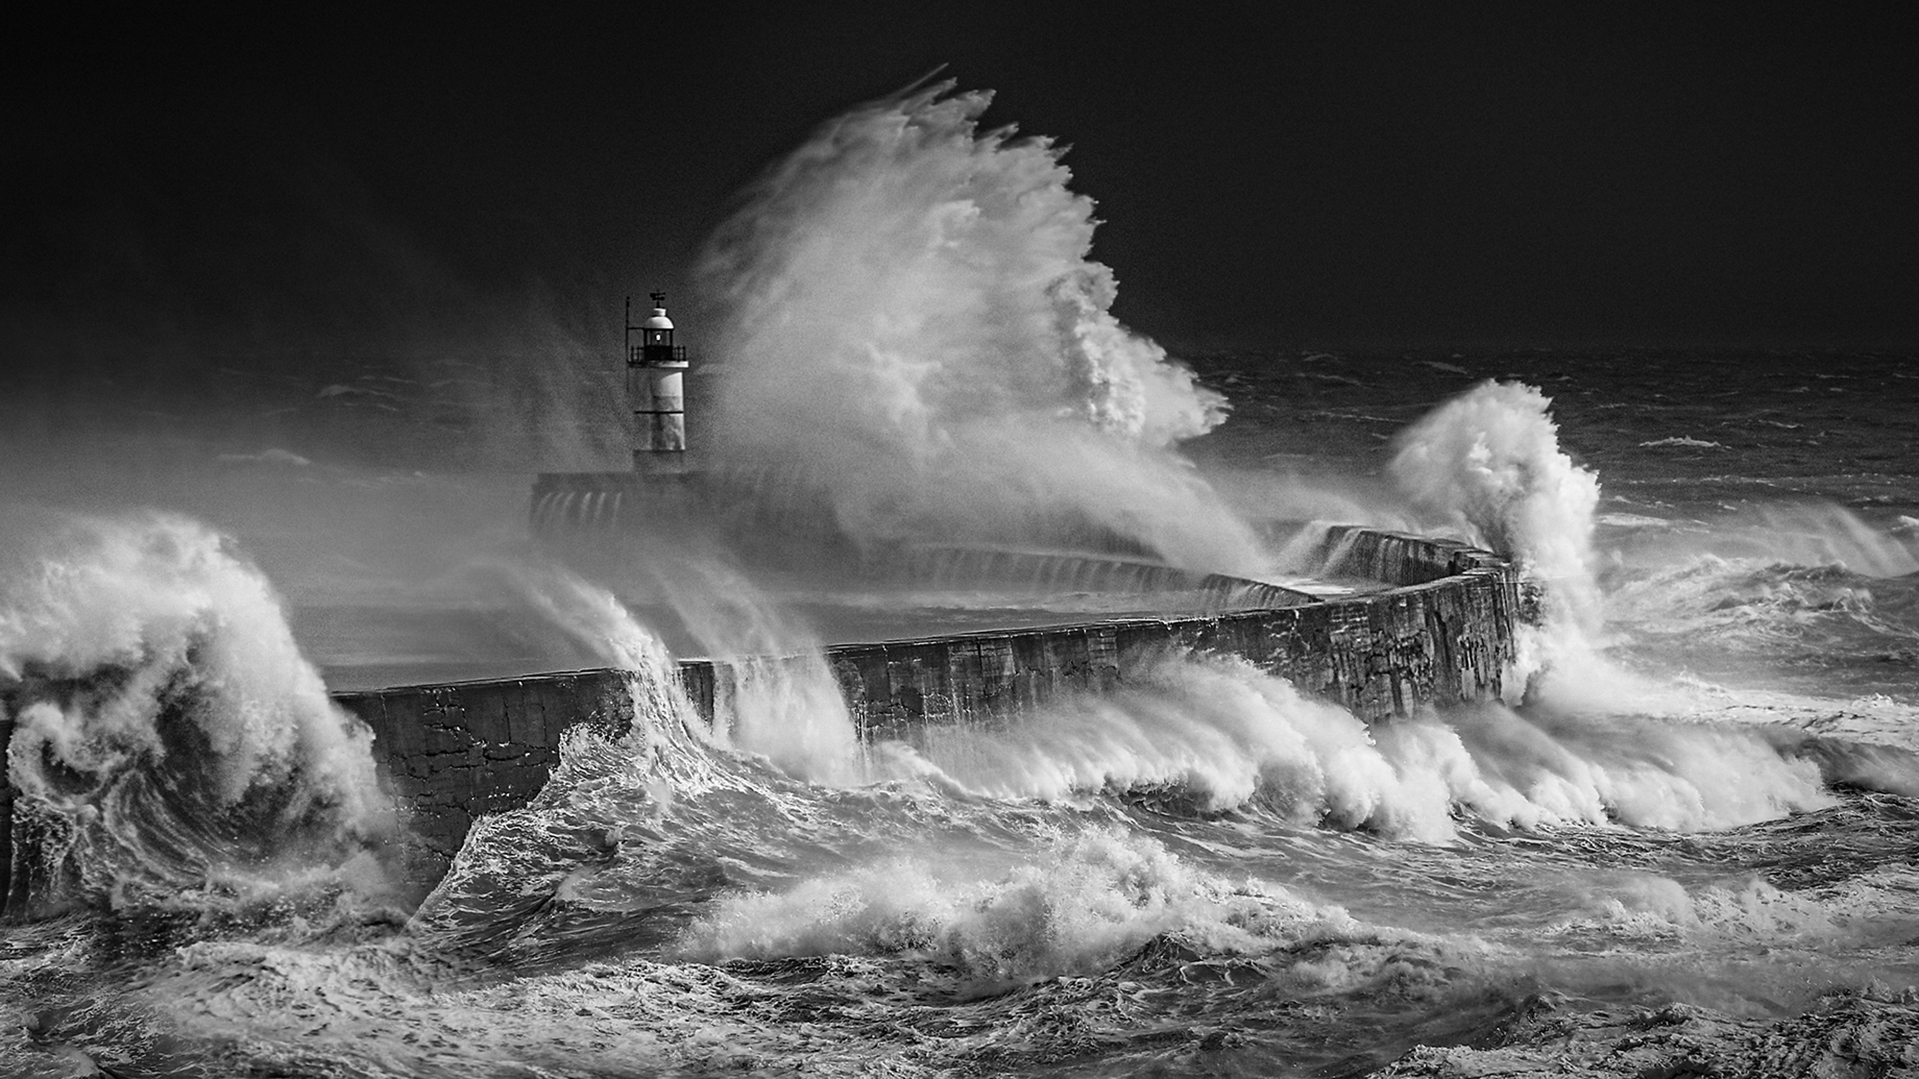 Newhaven Storm by Isobel Chesterman